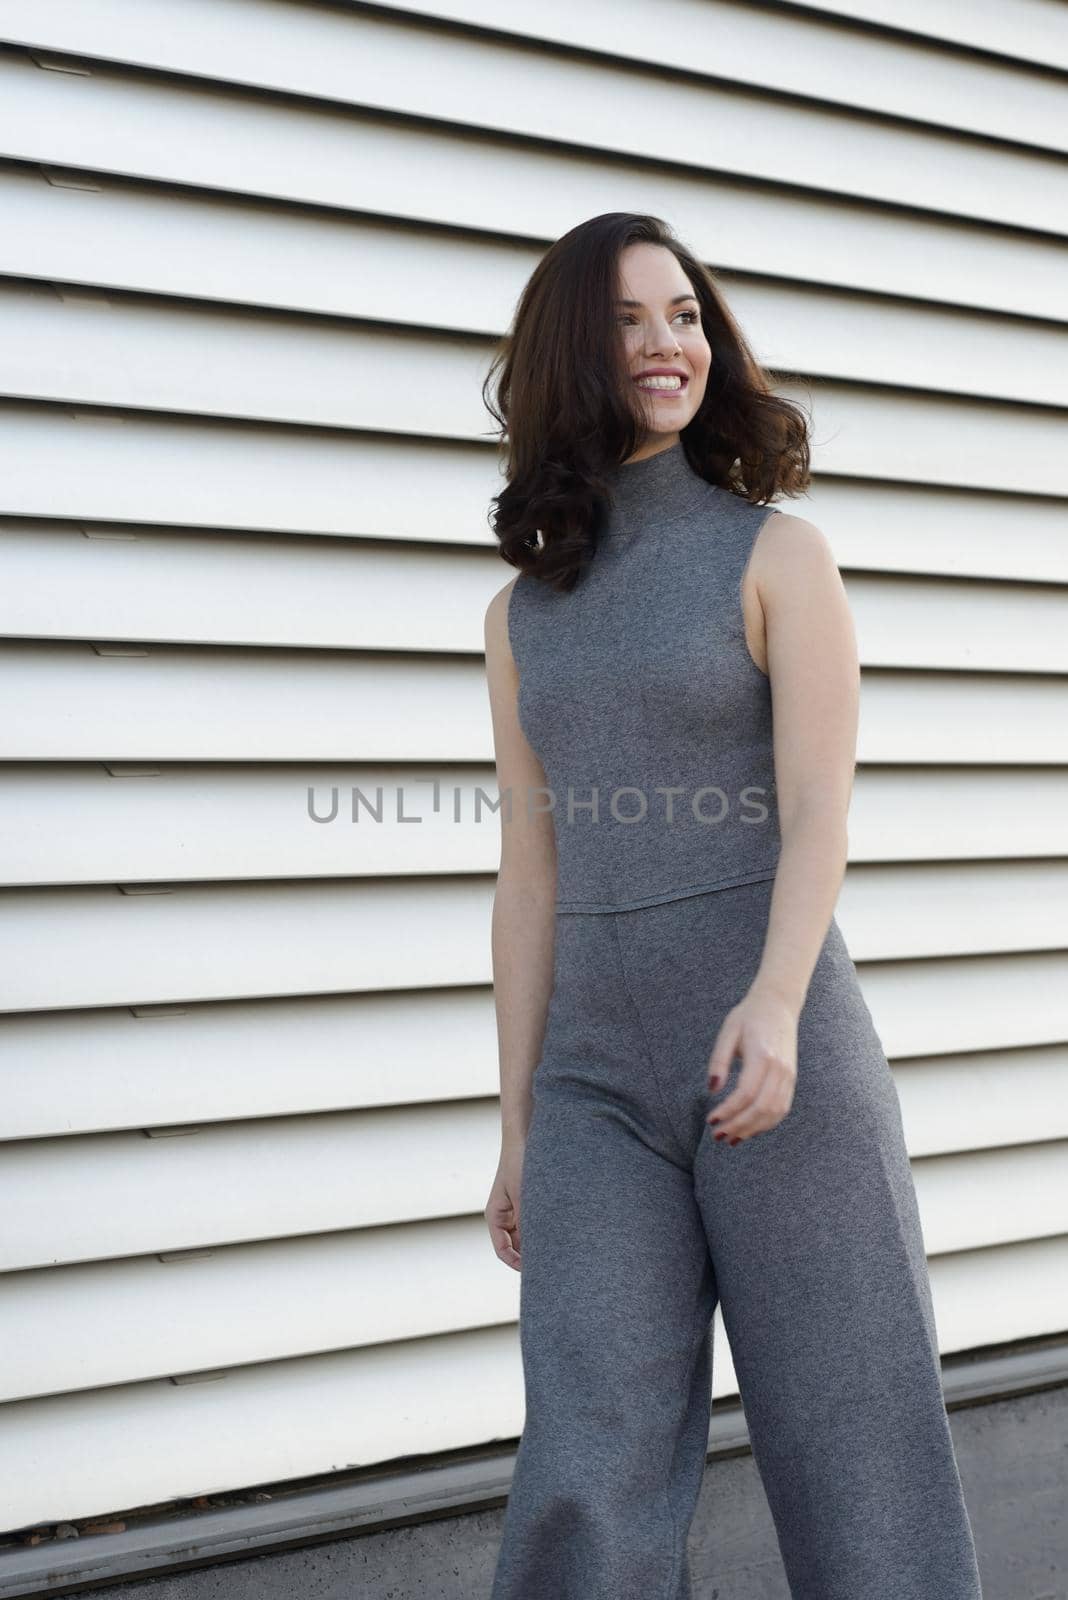 Young woman wearing casual clothes smiling in urban background. Girl with beautiful smile